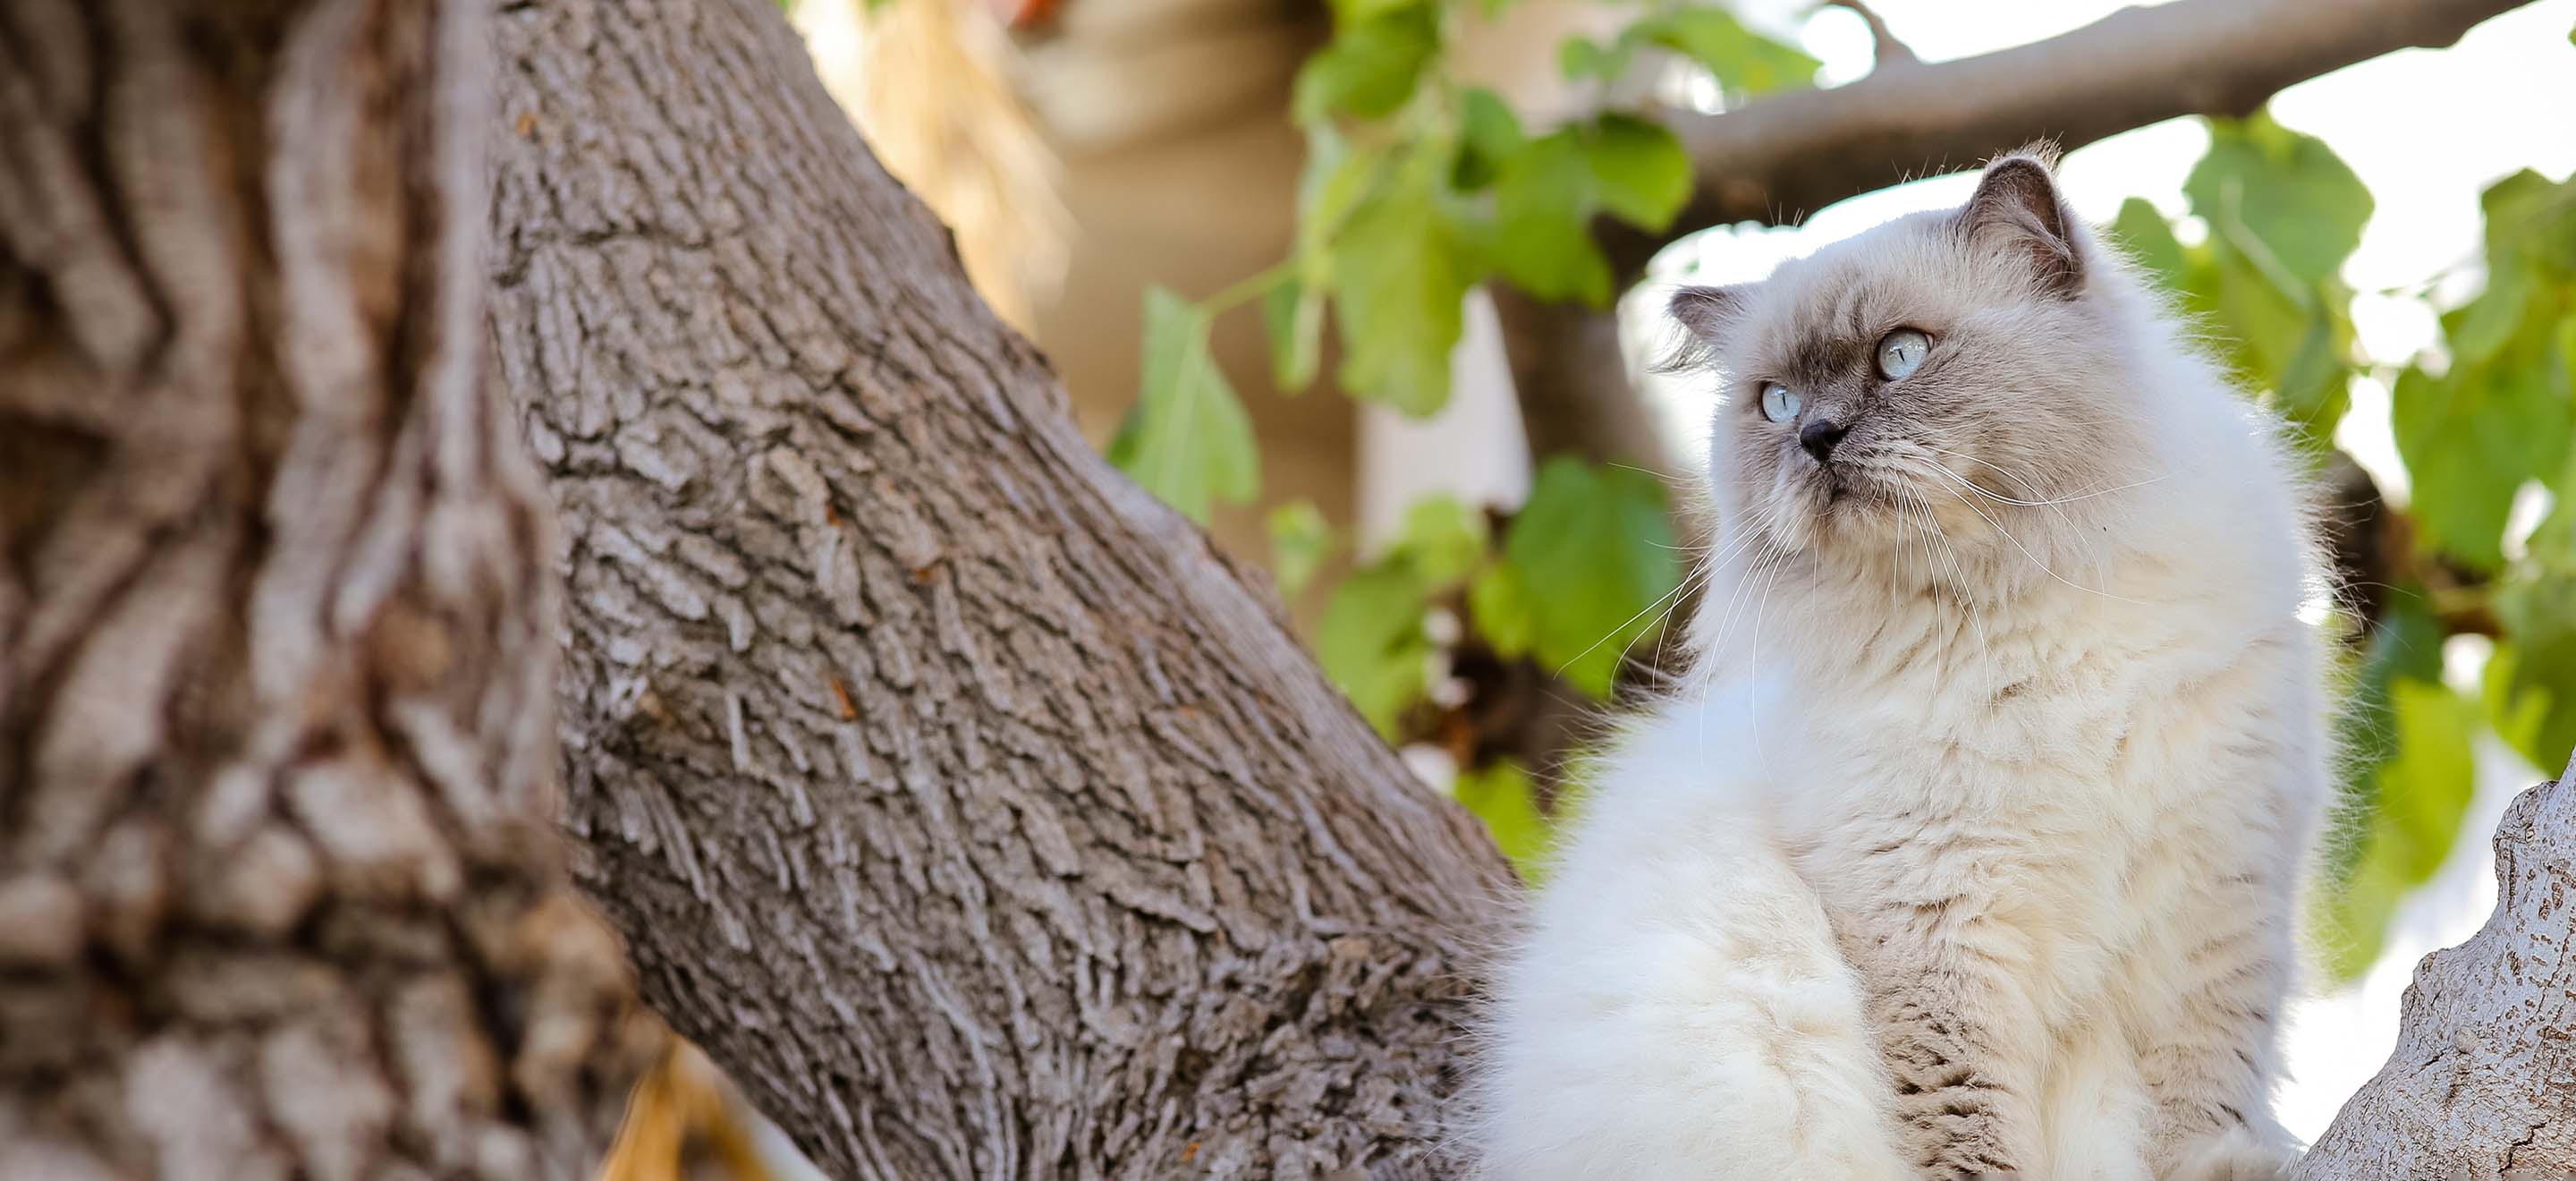 Himalayan cat standing in a tree looking to its right image